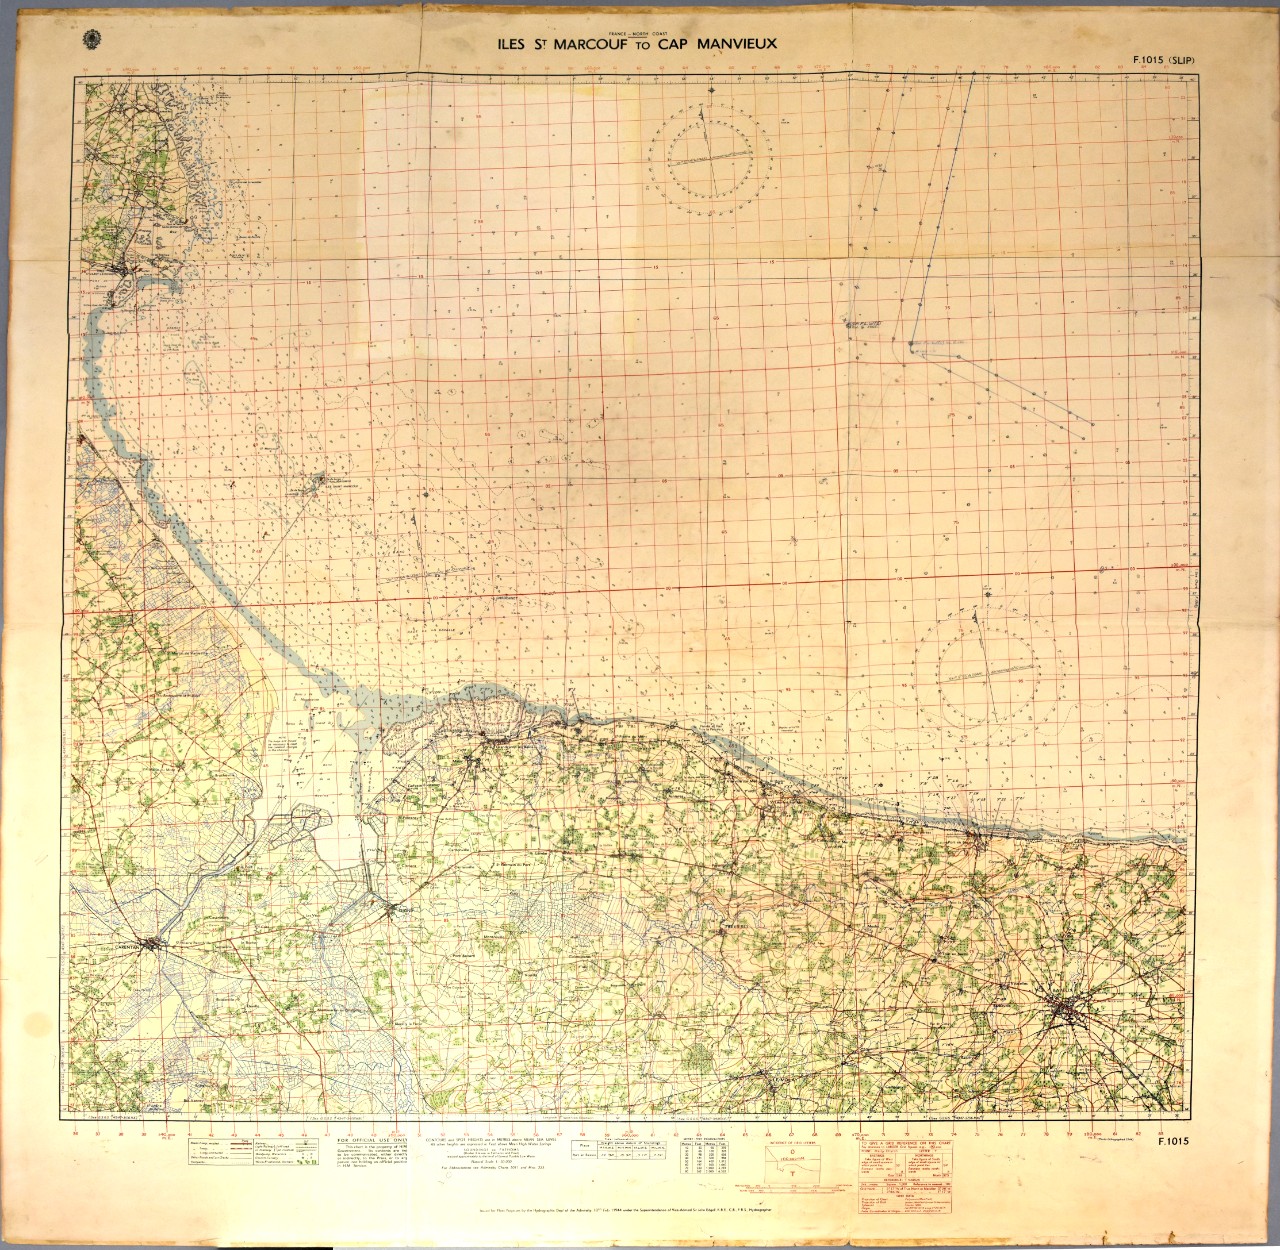 Chart of the coast of France showing Iles St. Marcouf to Cap Manvieux